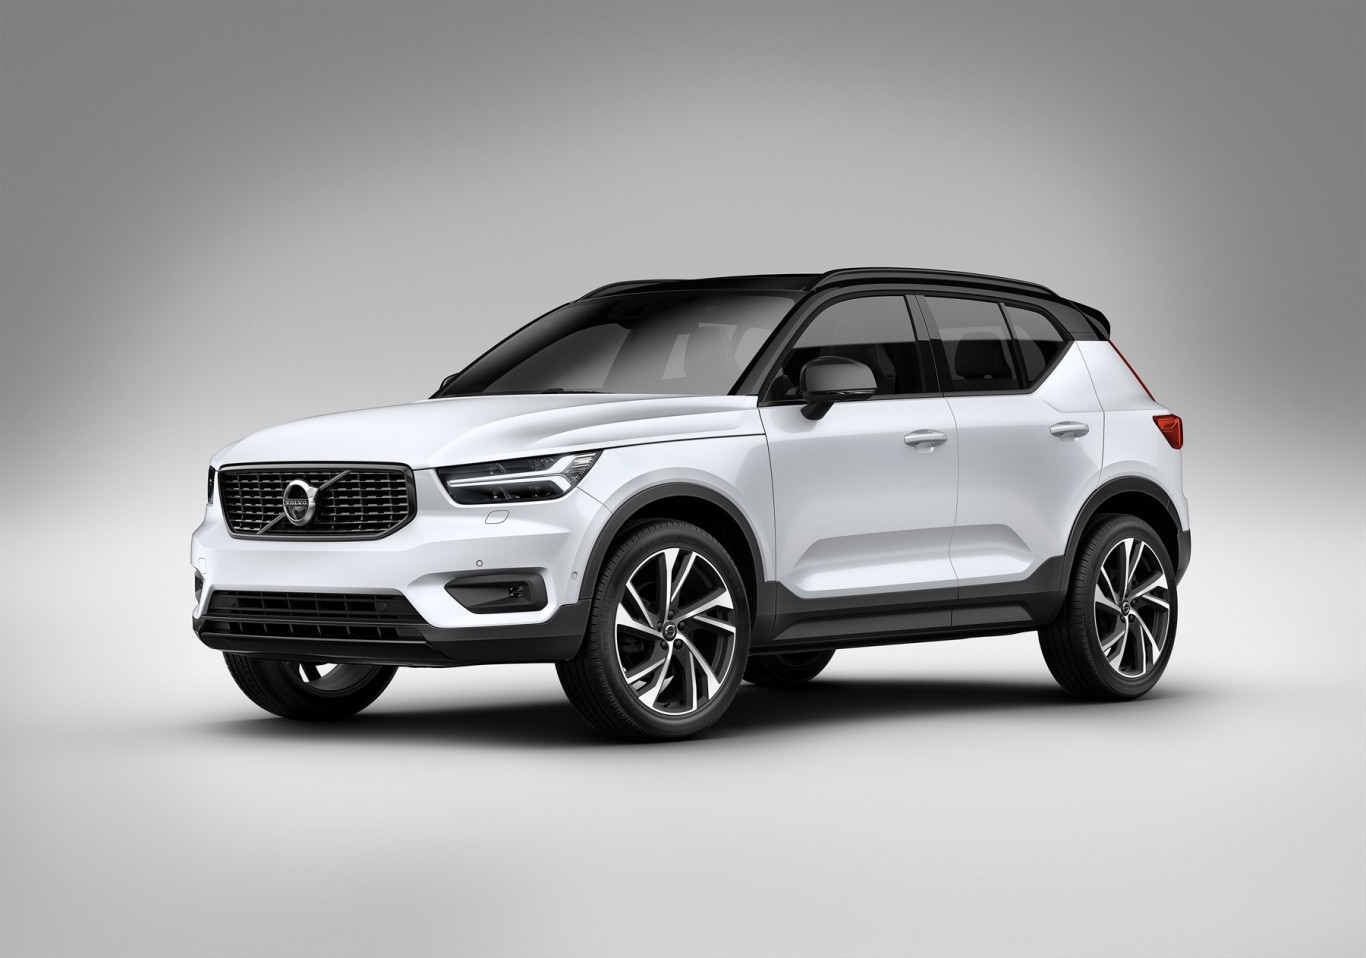 The New Volvo XC40 is named 2018 European Car of the Year